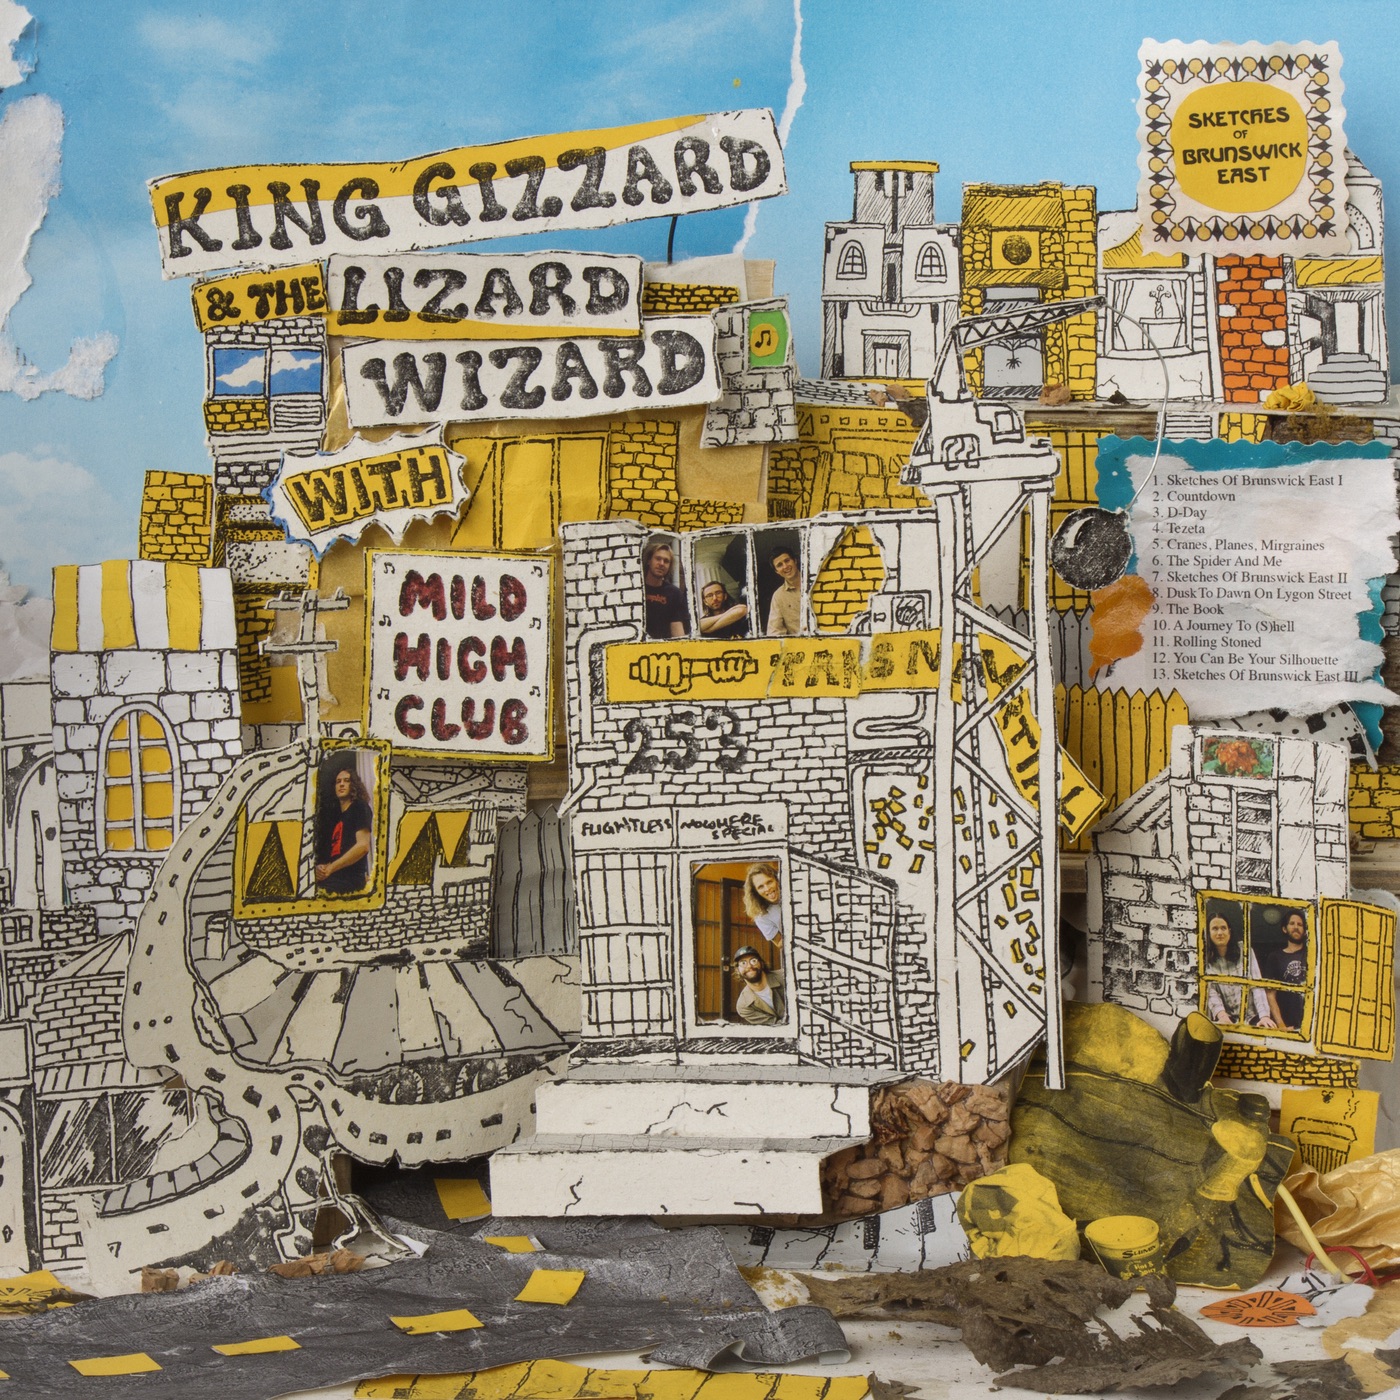 Sketches of Brunswick East by King Gizzard & The Lizard Wizard, Mild High Club